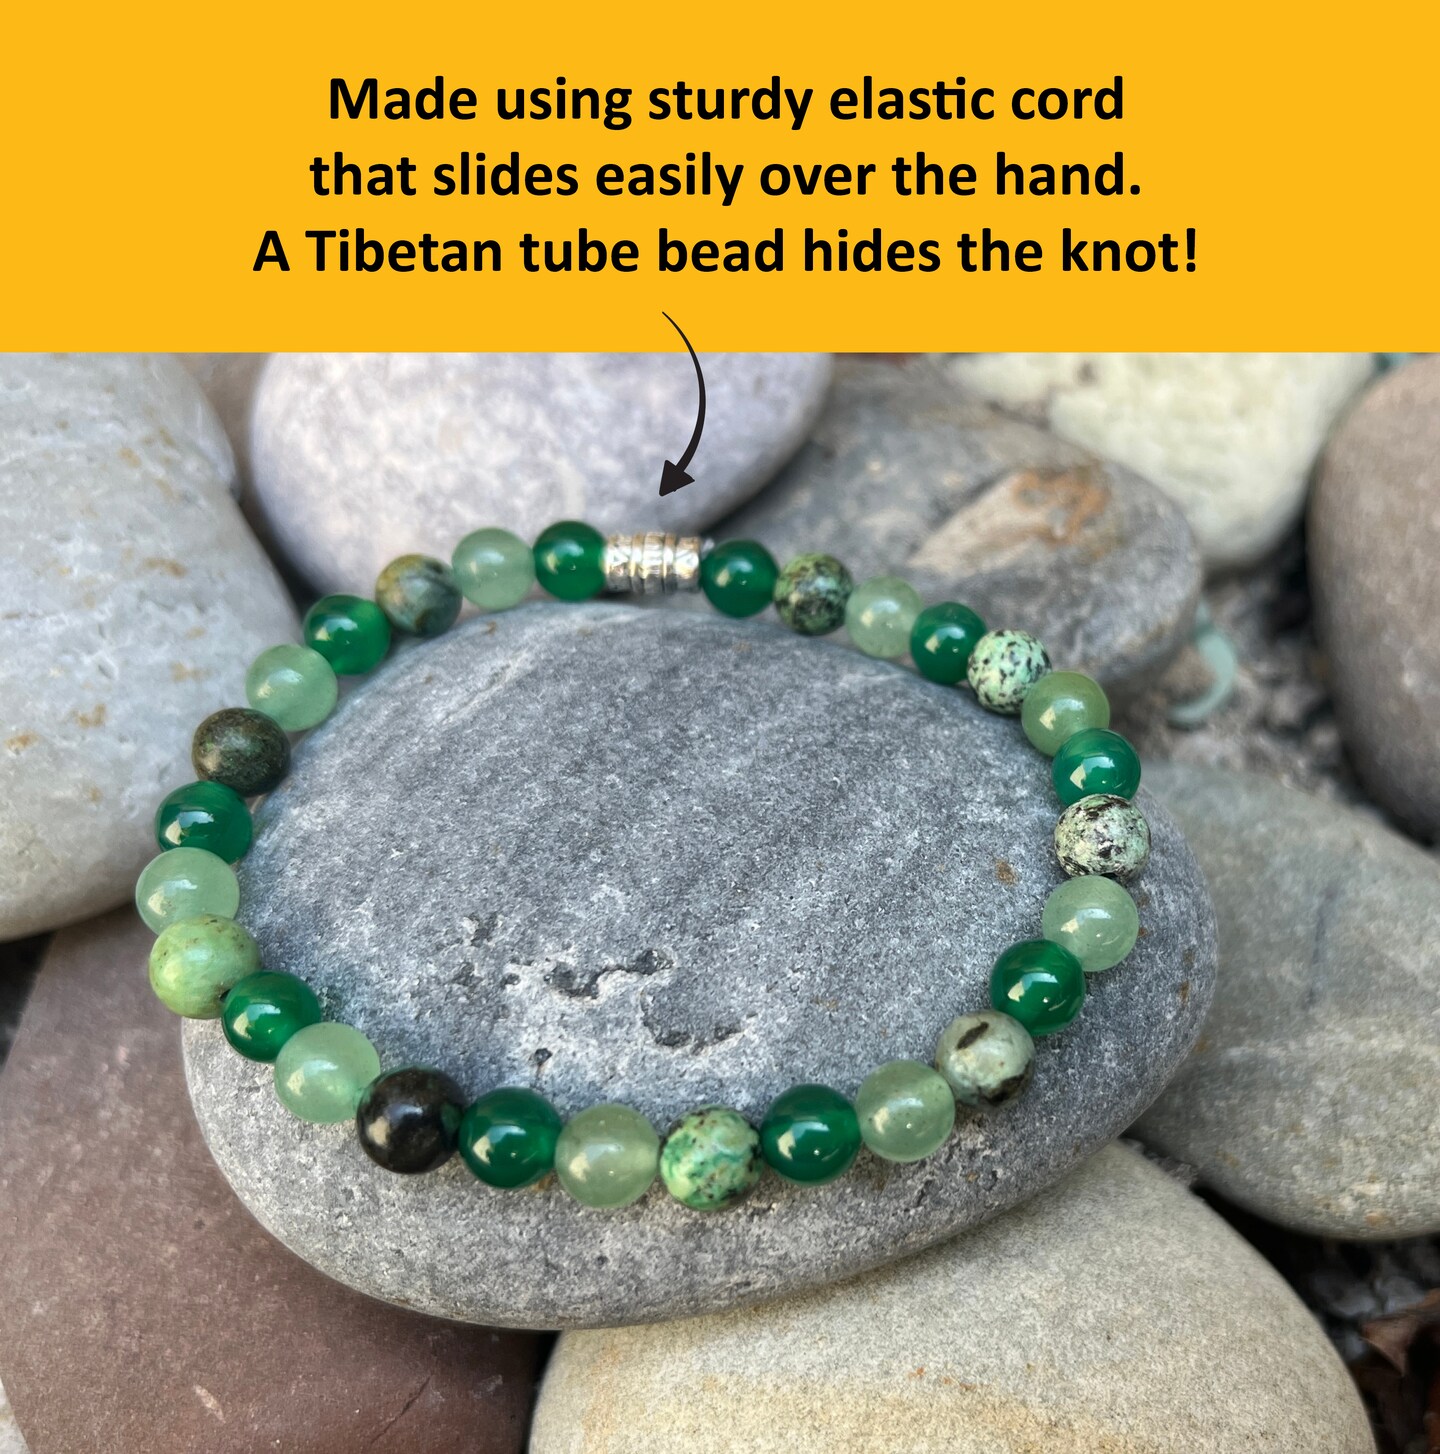 Anxiety Soothing Bracelet - Earthsynergy webstore New Zealand